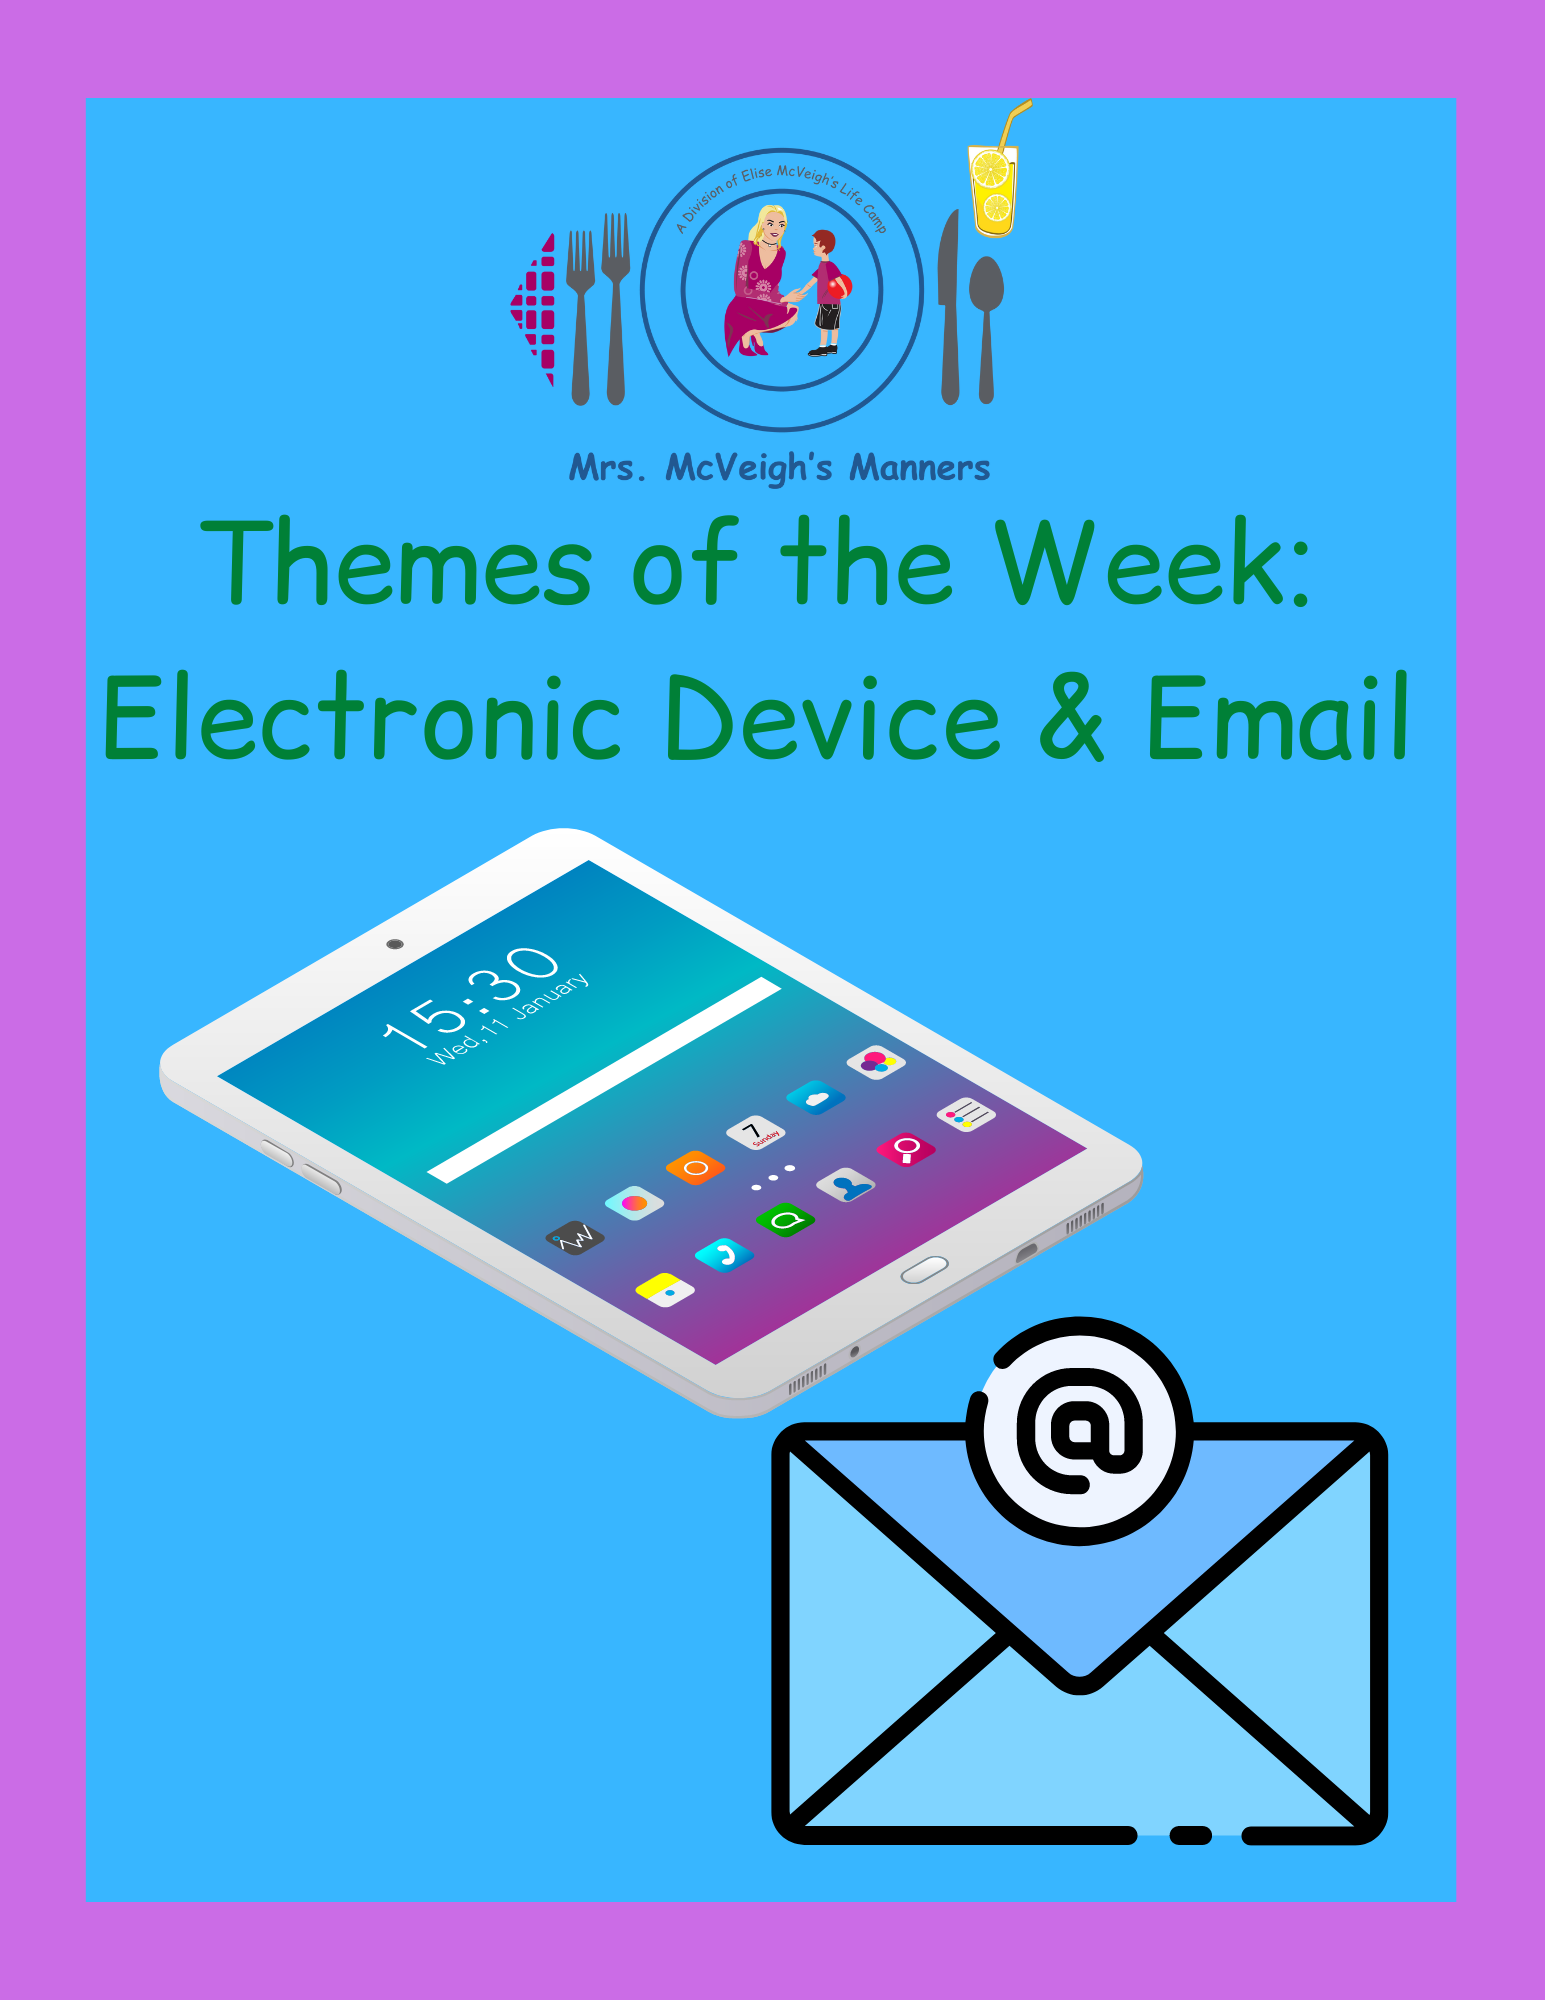 Electronic Devices and Email – Mrs. McVeigh’s Manners Themes of the Week